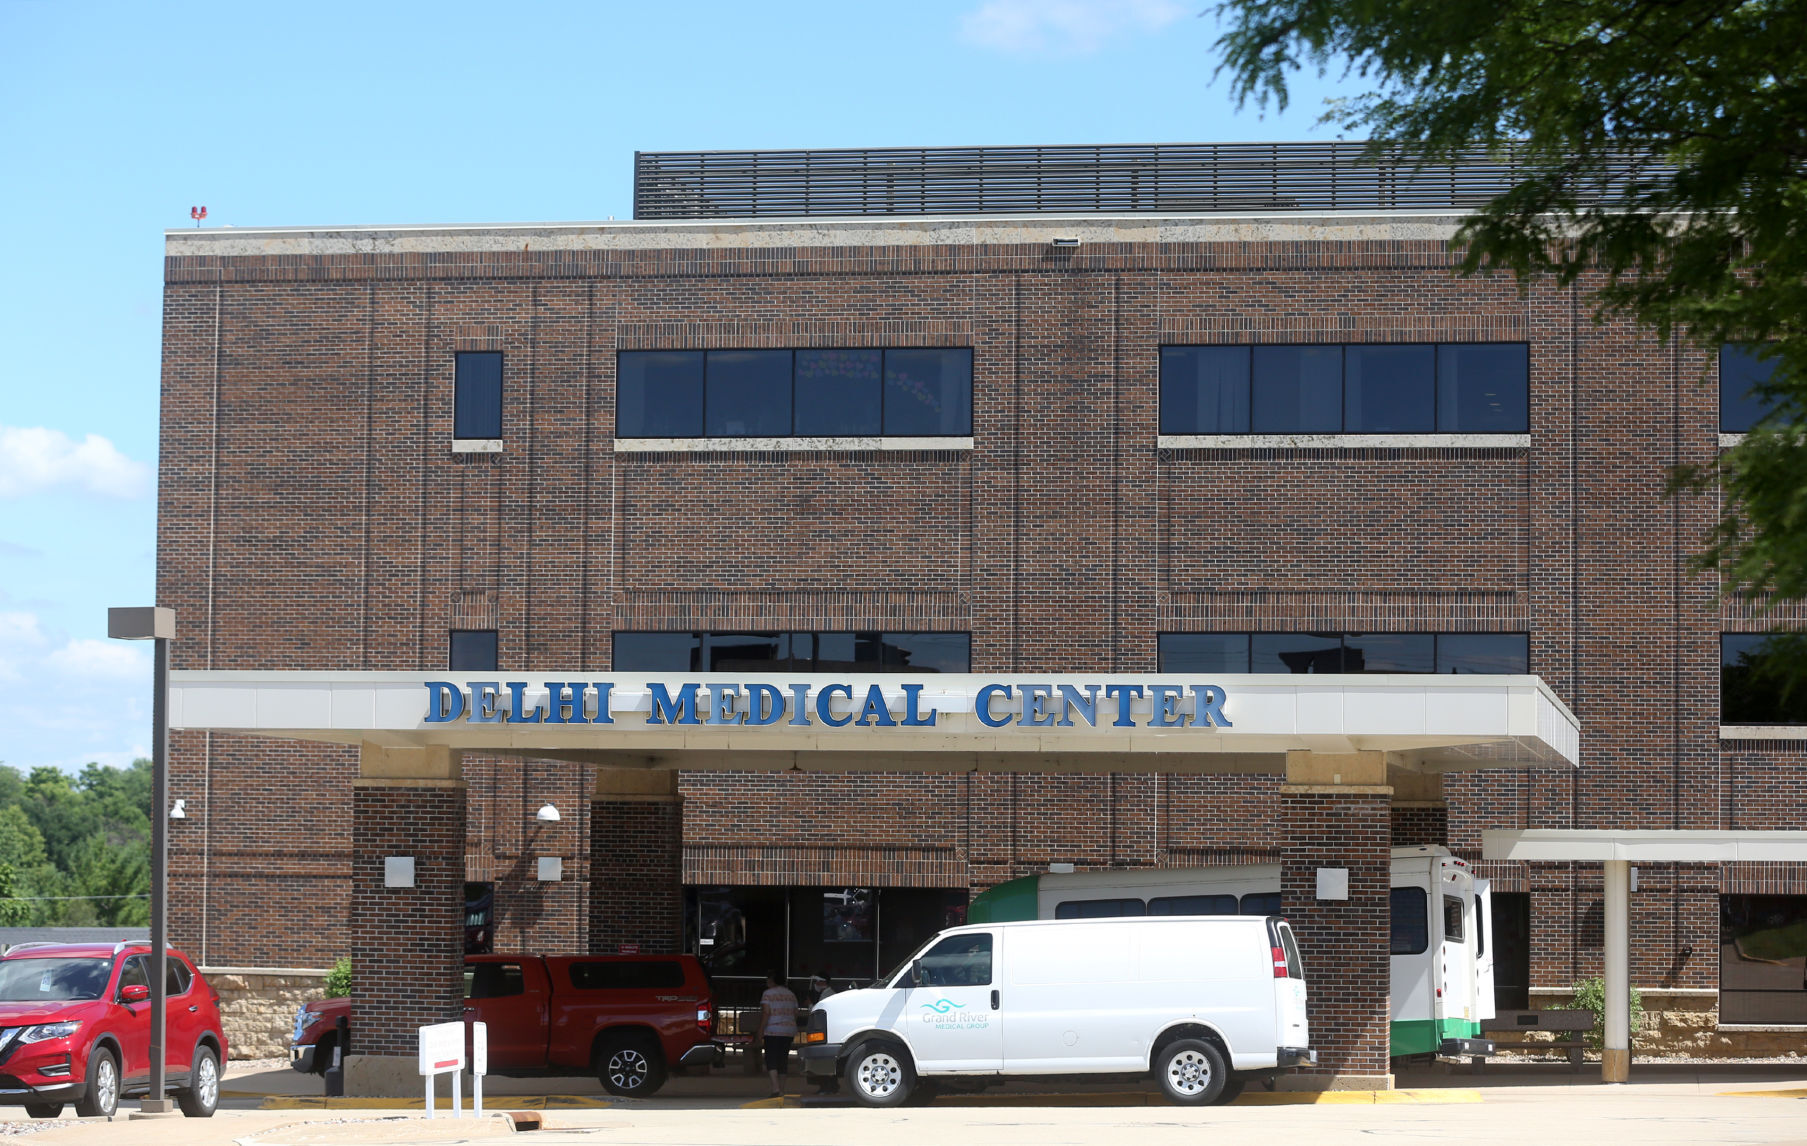 Wendt Regional Cancer Center is located within Delhi Medical Center in Dubuque. Photo taken Thursday, July 16, 2020. PHOTO CREDIT: JESSICA REILLY